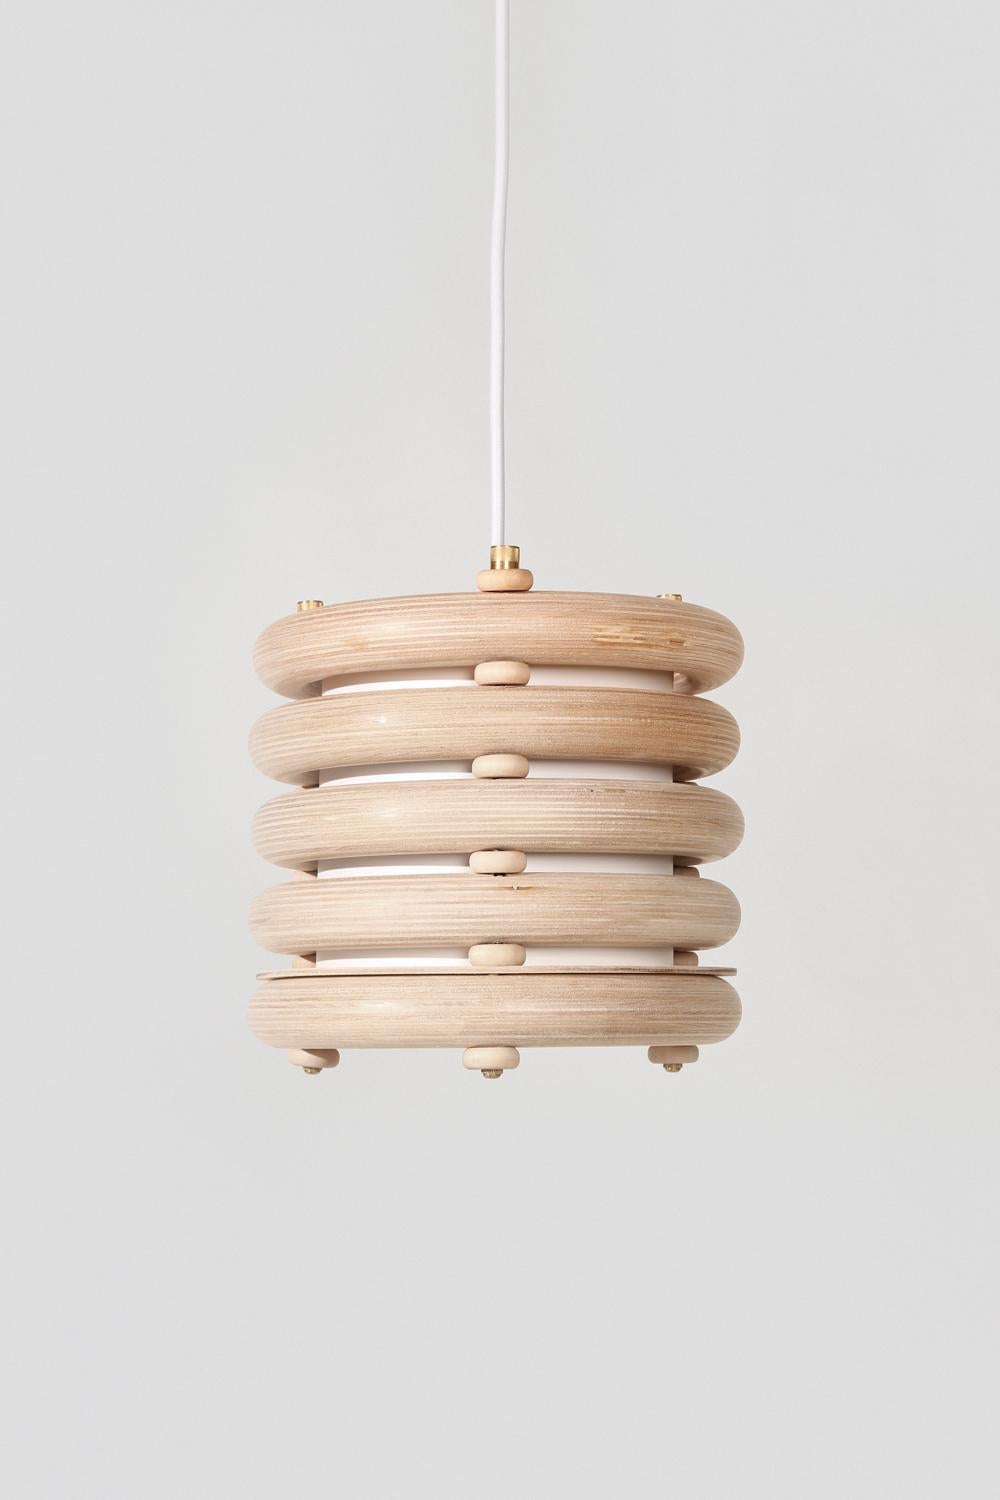 Made to order. Please allow six weeks for production.

The Echo pendant light pairs tropical warmth with minimalist appeal. Made of stacked finely finished birch, the hanging light has an architectural rigidity and a soft visual appeal. Works with